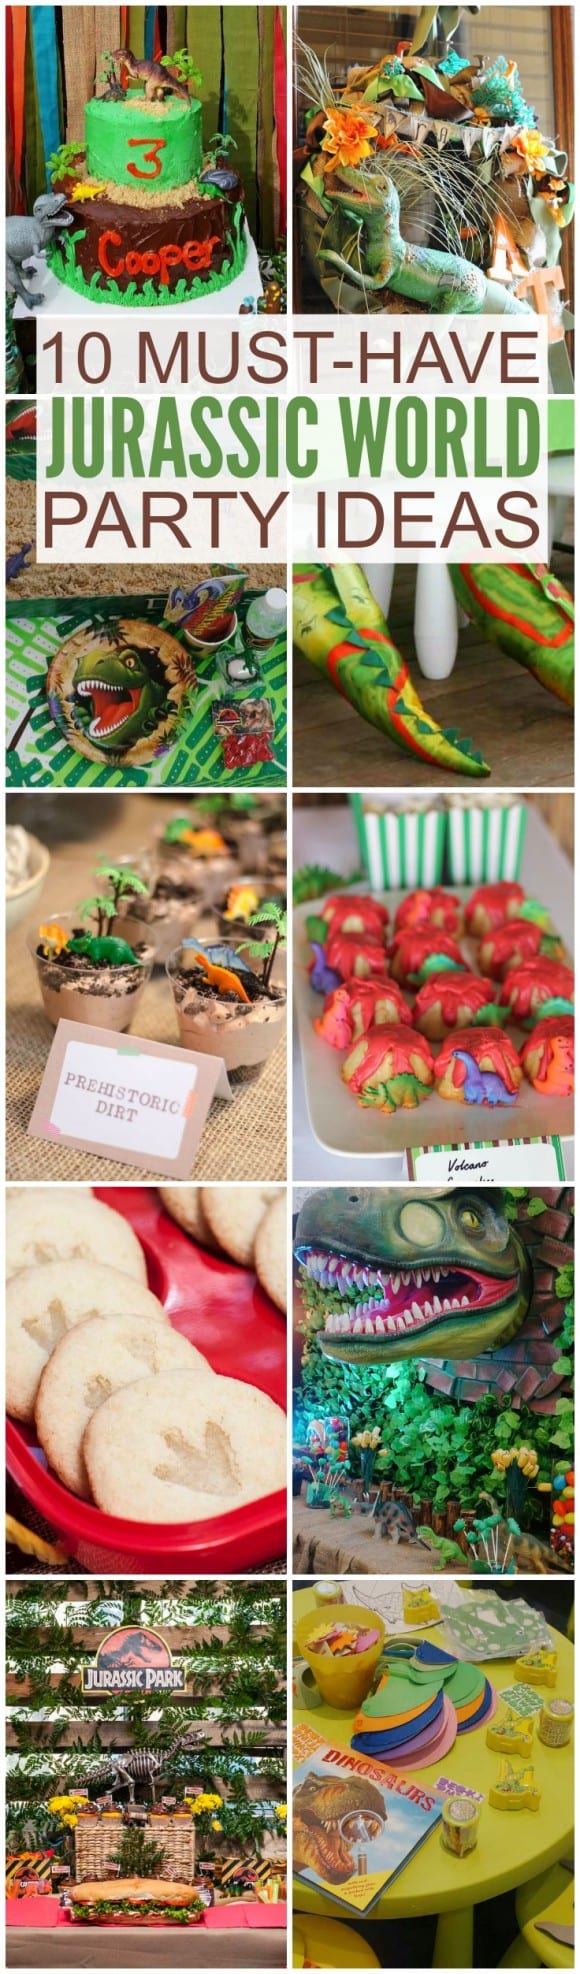 10 must have Jurassic World party ideas, great for your dinosaur birthday party! | CatchMyParty.com